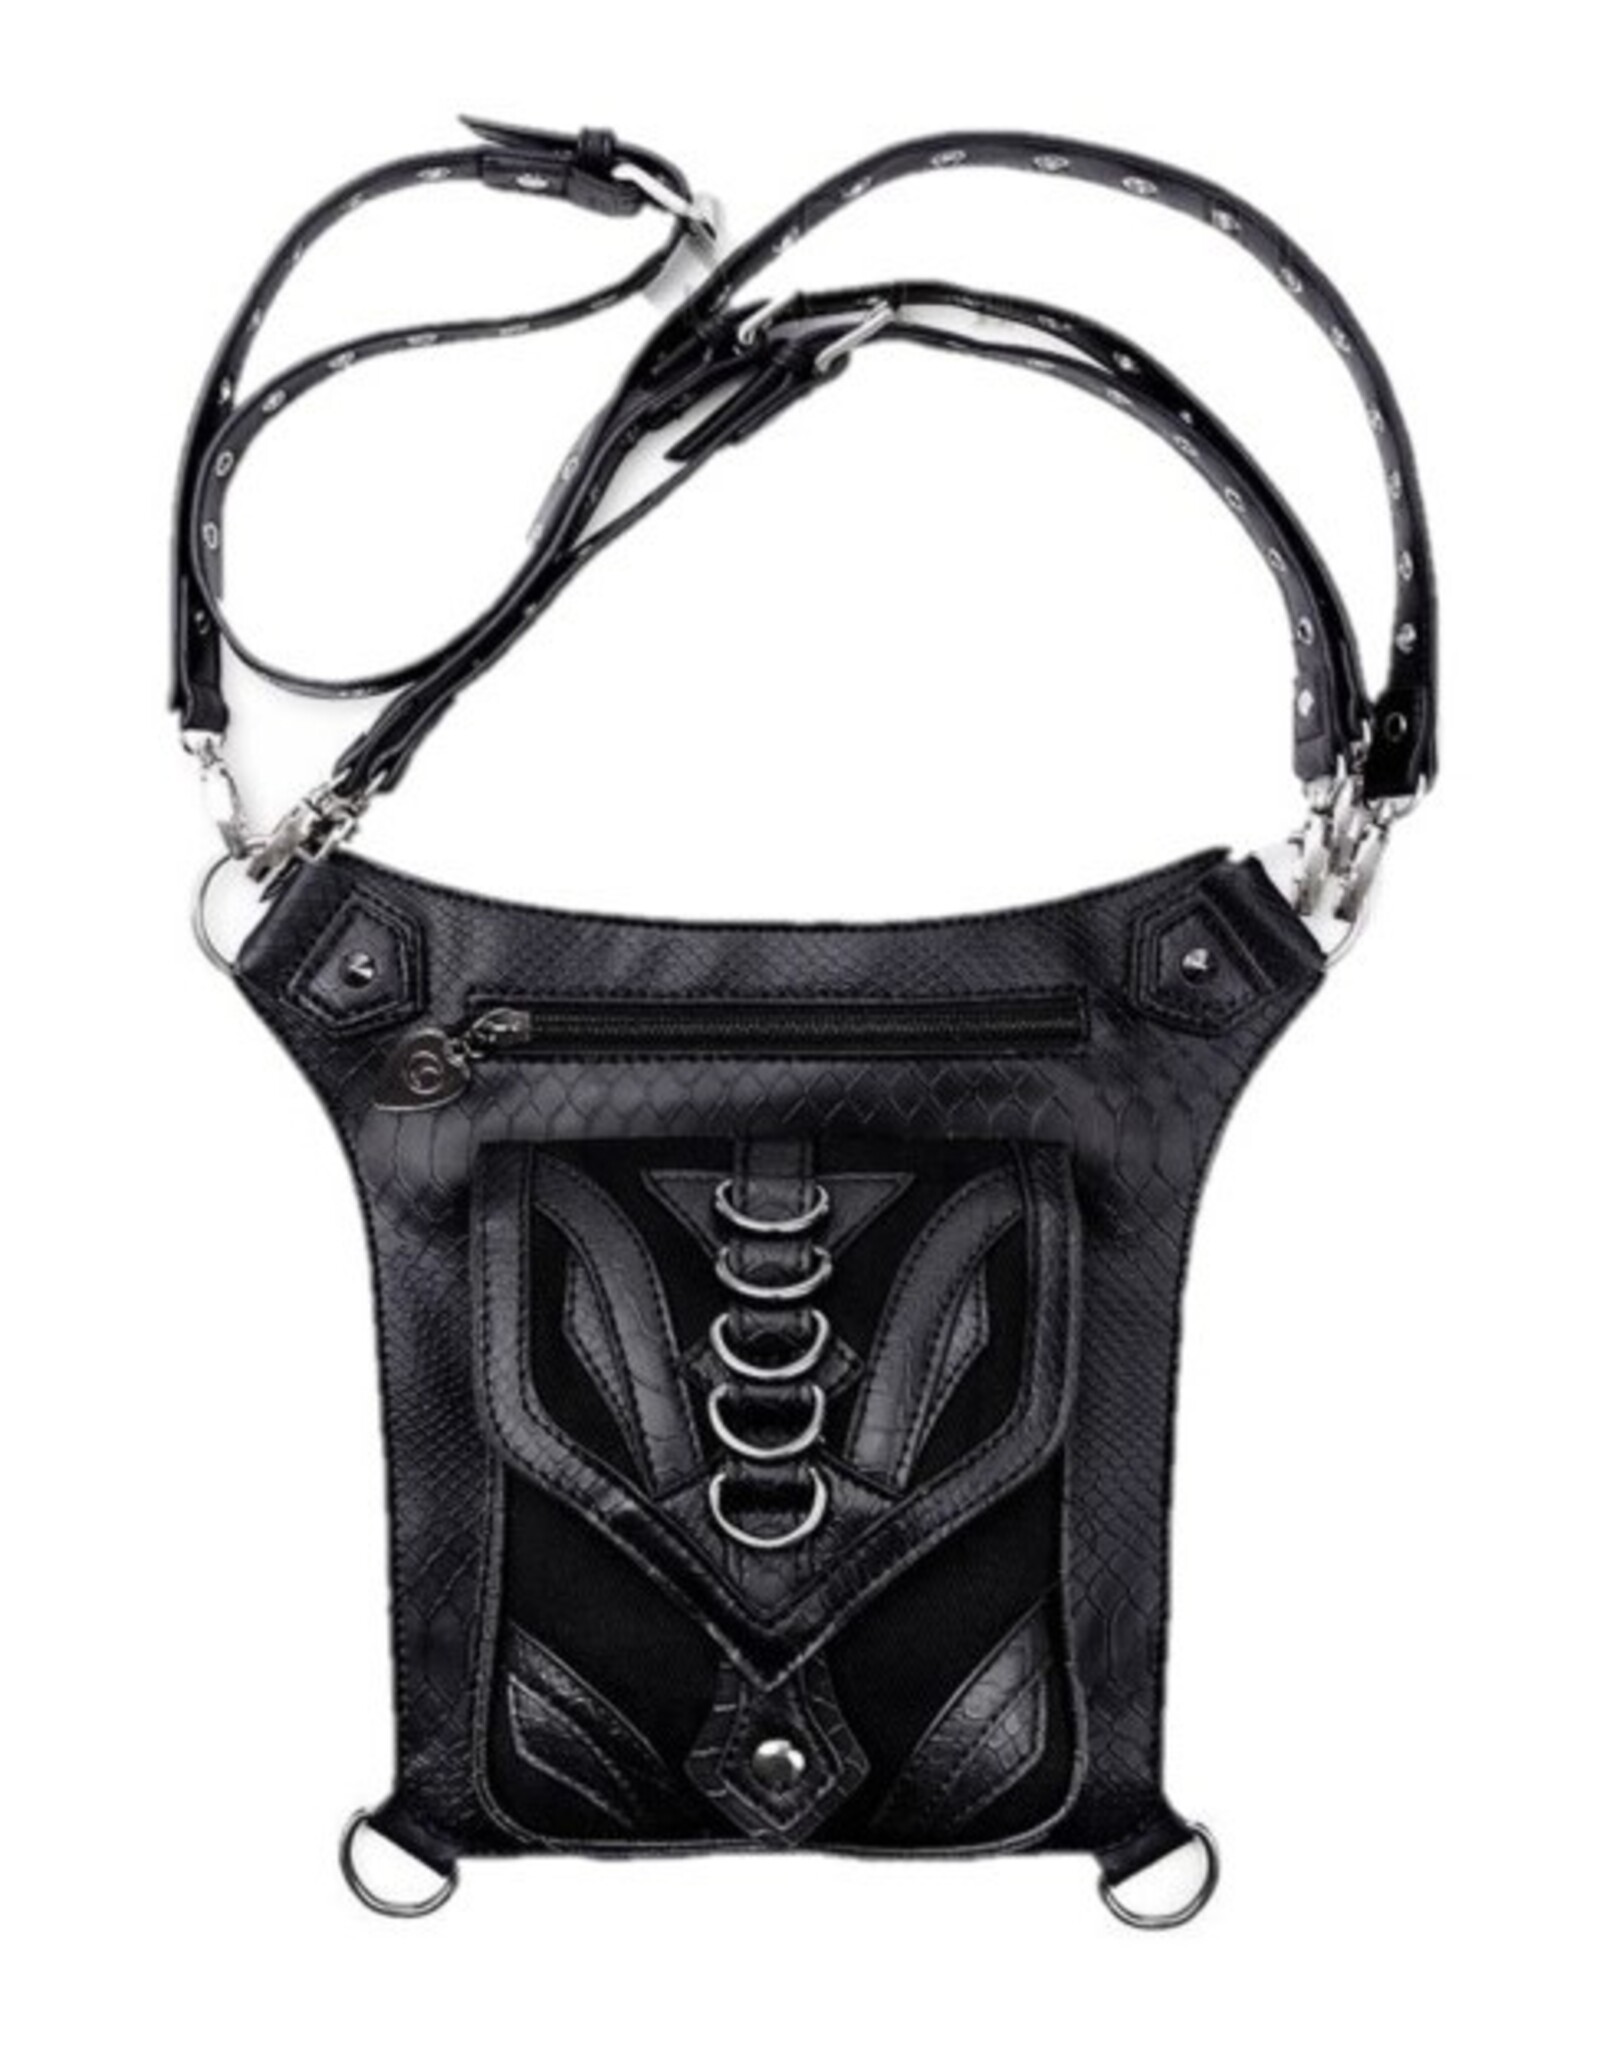 Restyle Gothic bags Steampunk bags - Steampunk Utility Belt Dragon Holster Restyle